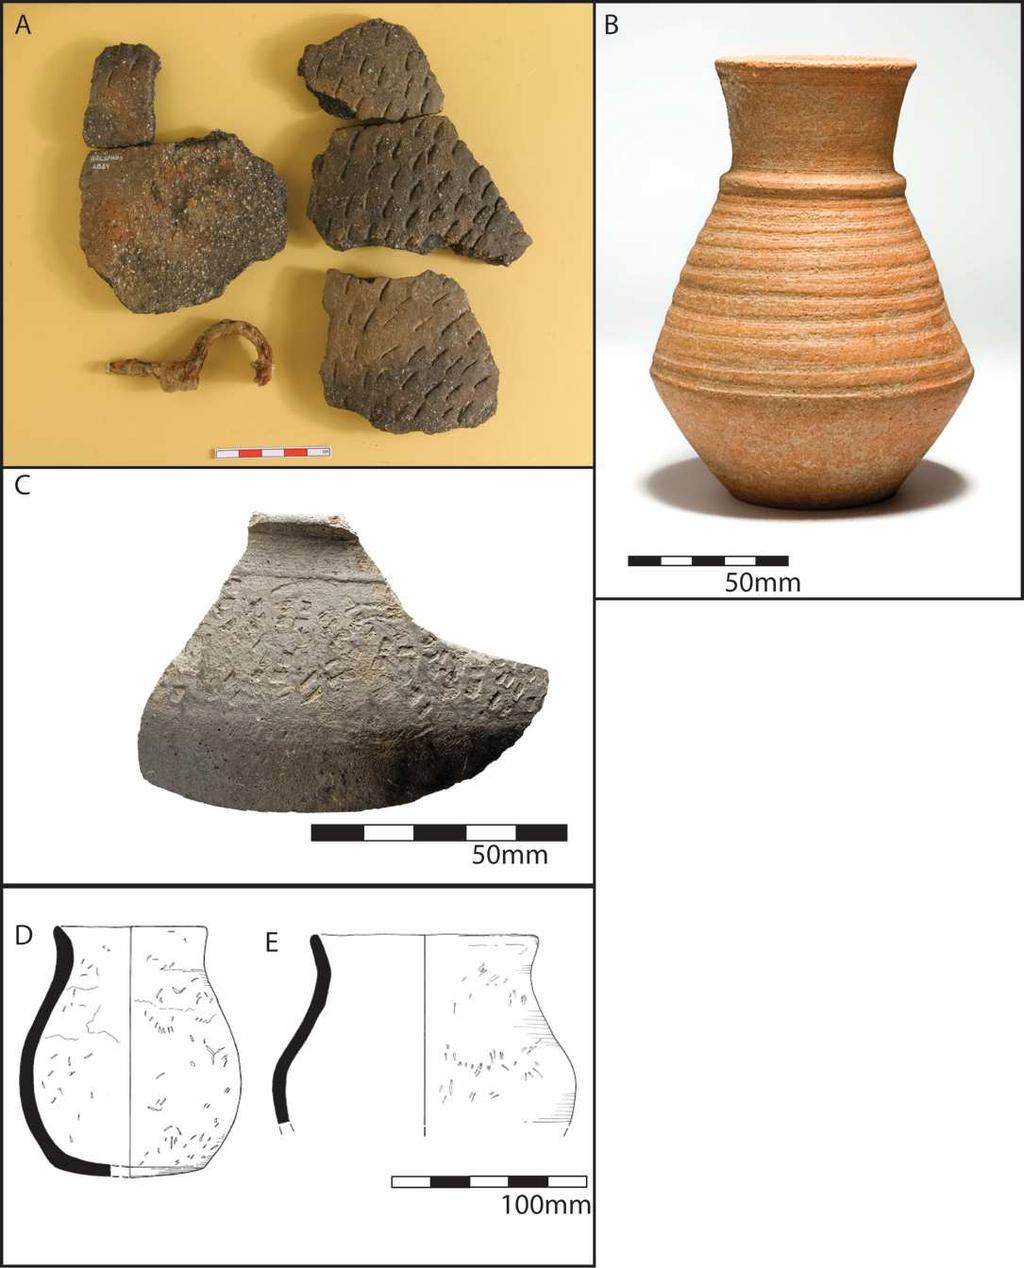 Figure 3: Examples of Pottery Discussed in the Text a) Oolithic limestone tempered pottery from Springhead; b) and c) imported wares from the East Kent